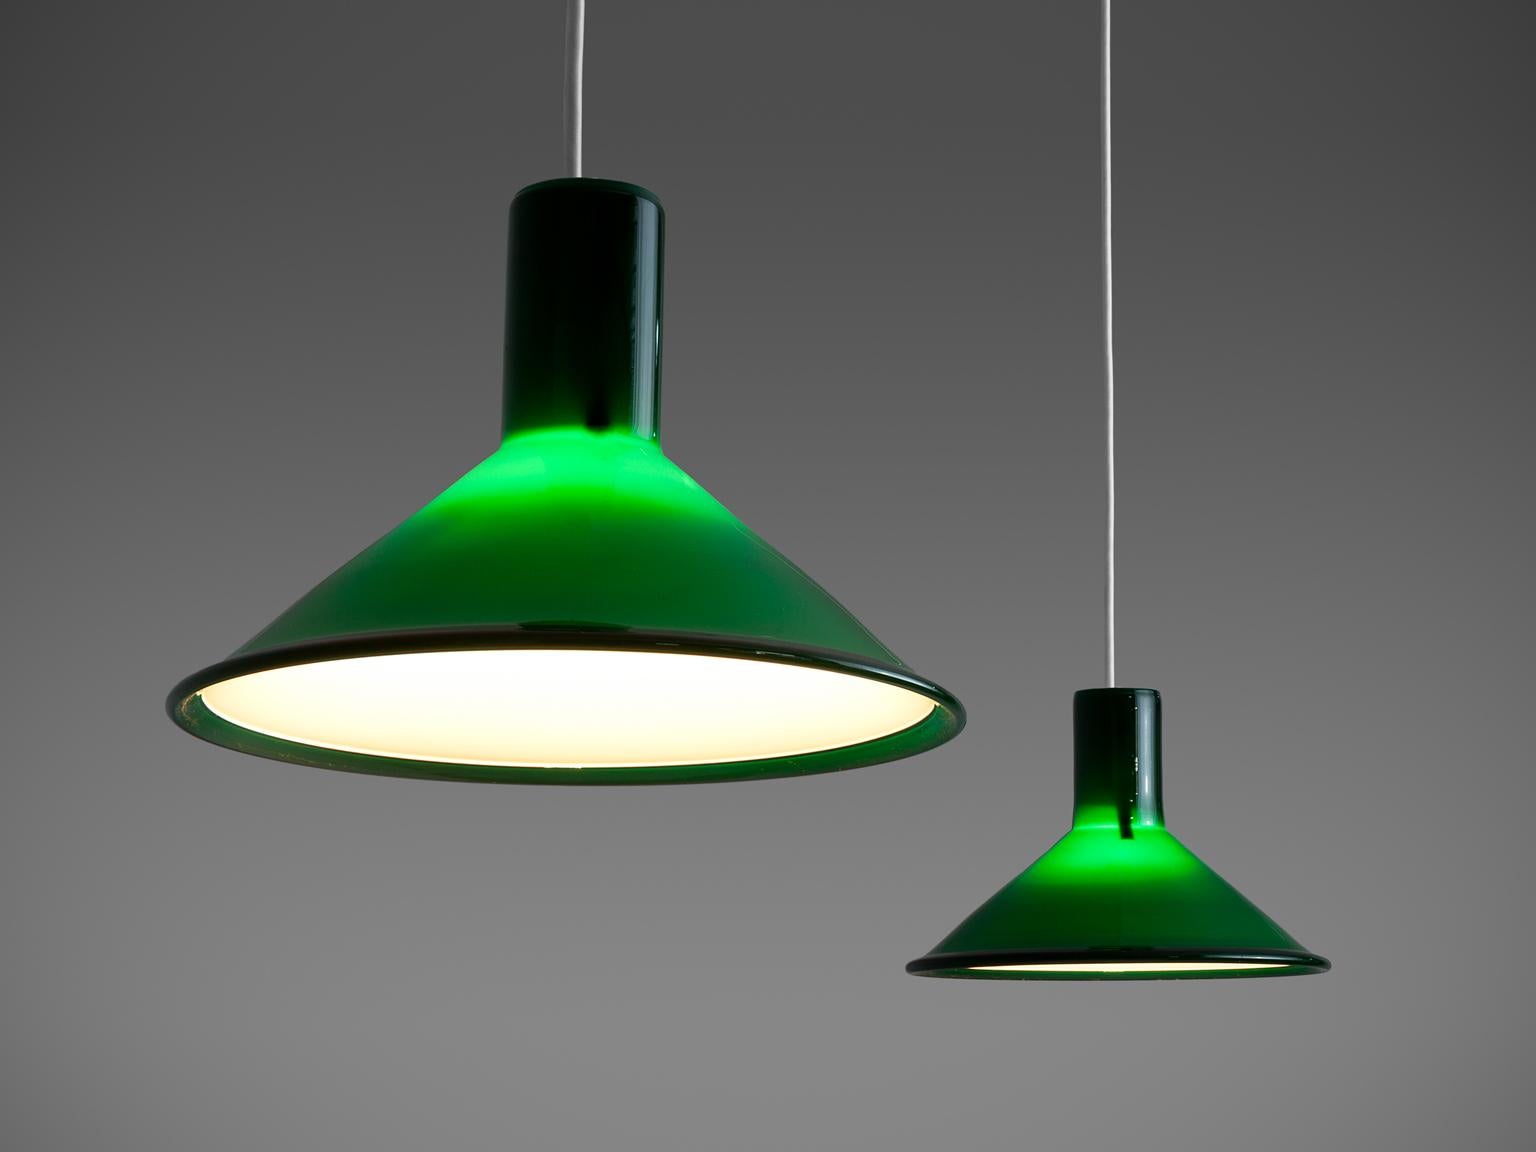 Michael Bang for Holmegaard pair of glass pendant lights, in green glass, Denmark, 1970s. 

These small green glass pendants designed by Michael Bang for Holmegaard are in green glass and the inside has a white inner casing. These pendants have an